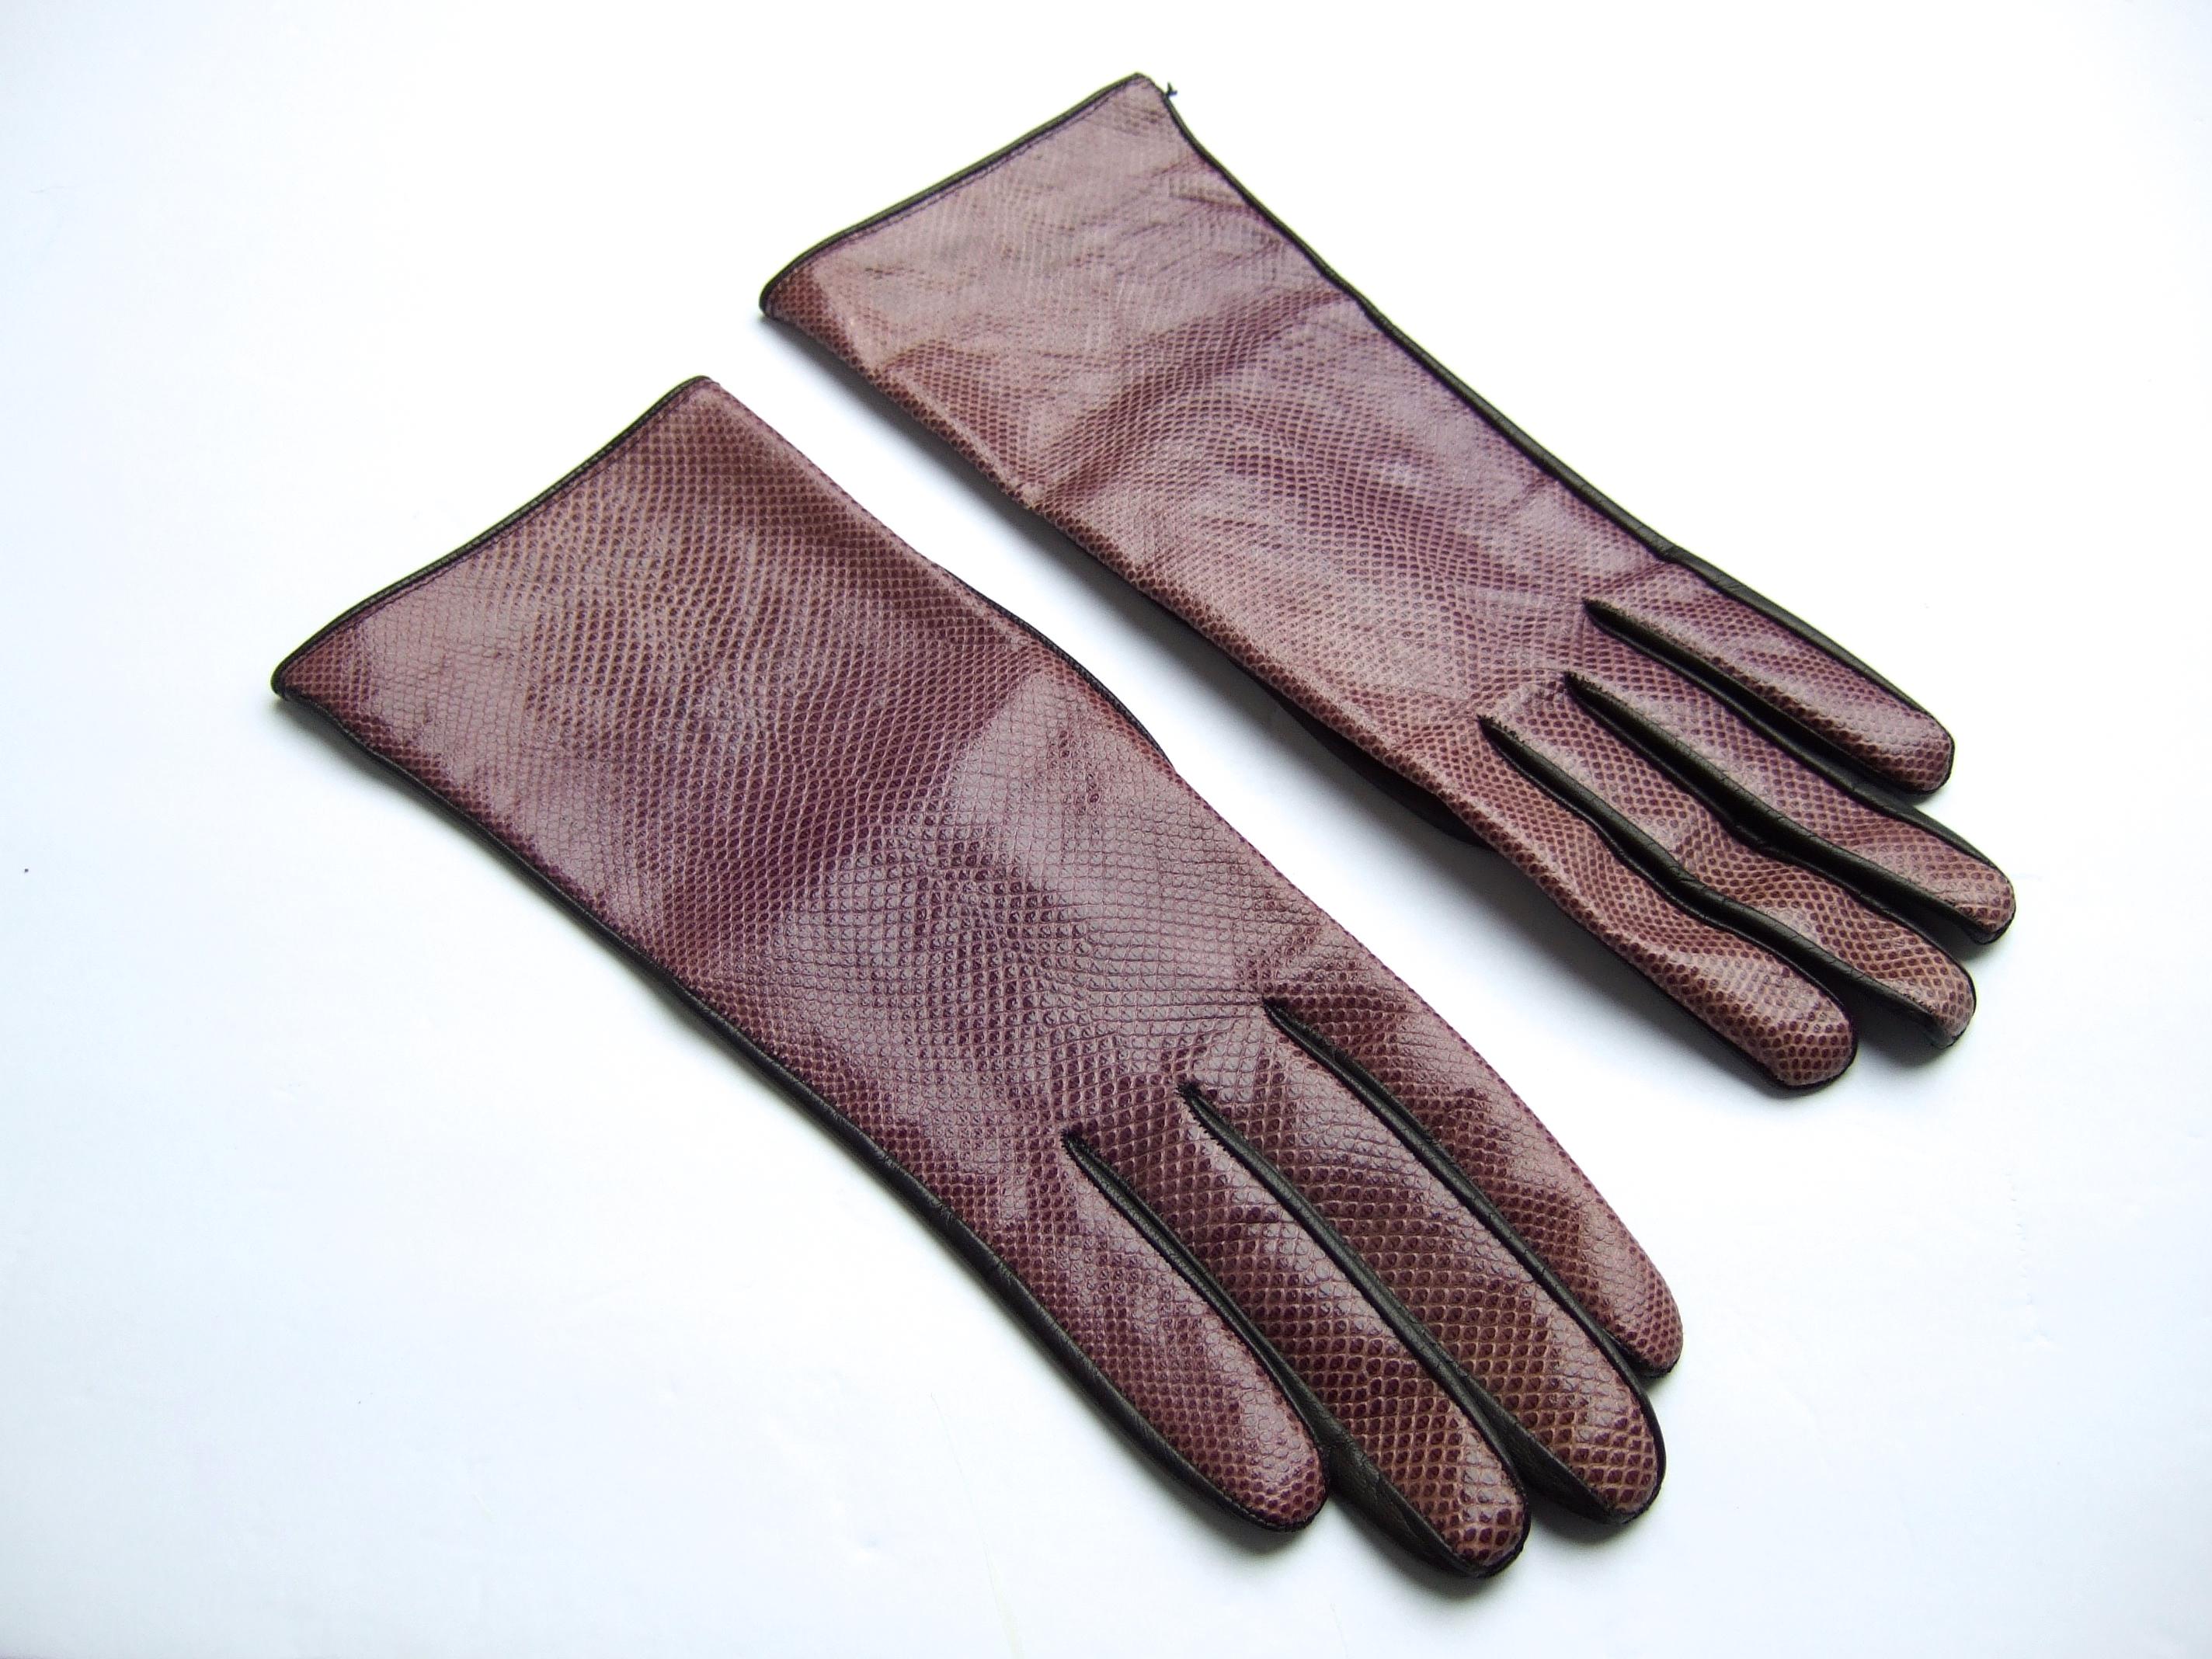 Yves Saint Laurent Chic Embossed Purple Leather Gloves Size 7 c 1980s For Sale 3